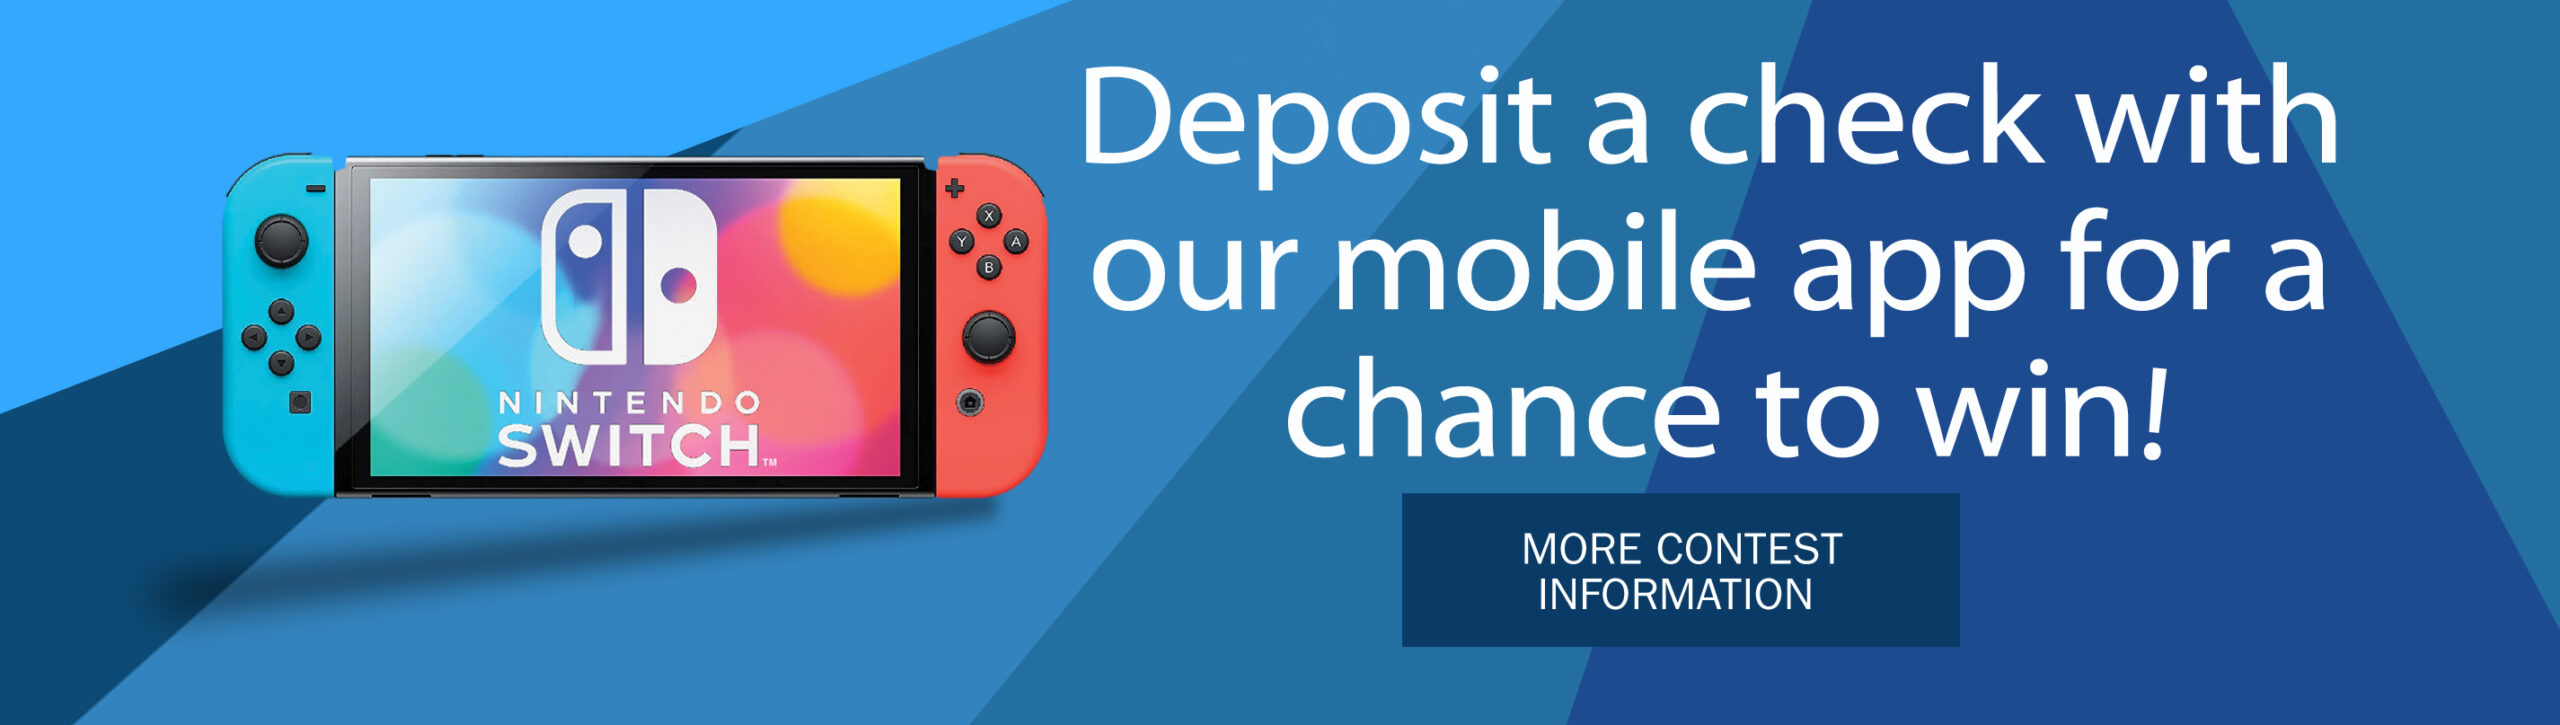 image: nintendo switch. text: deposit a check with our mobile app for a chance to win !